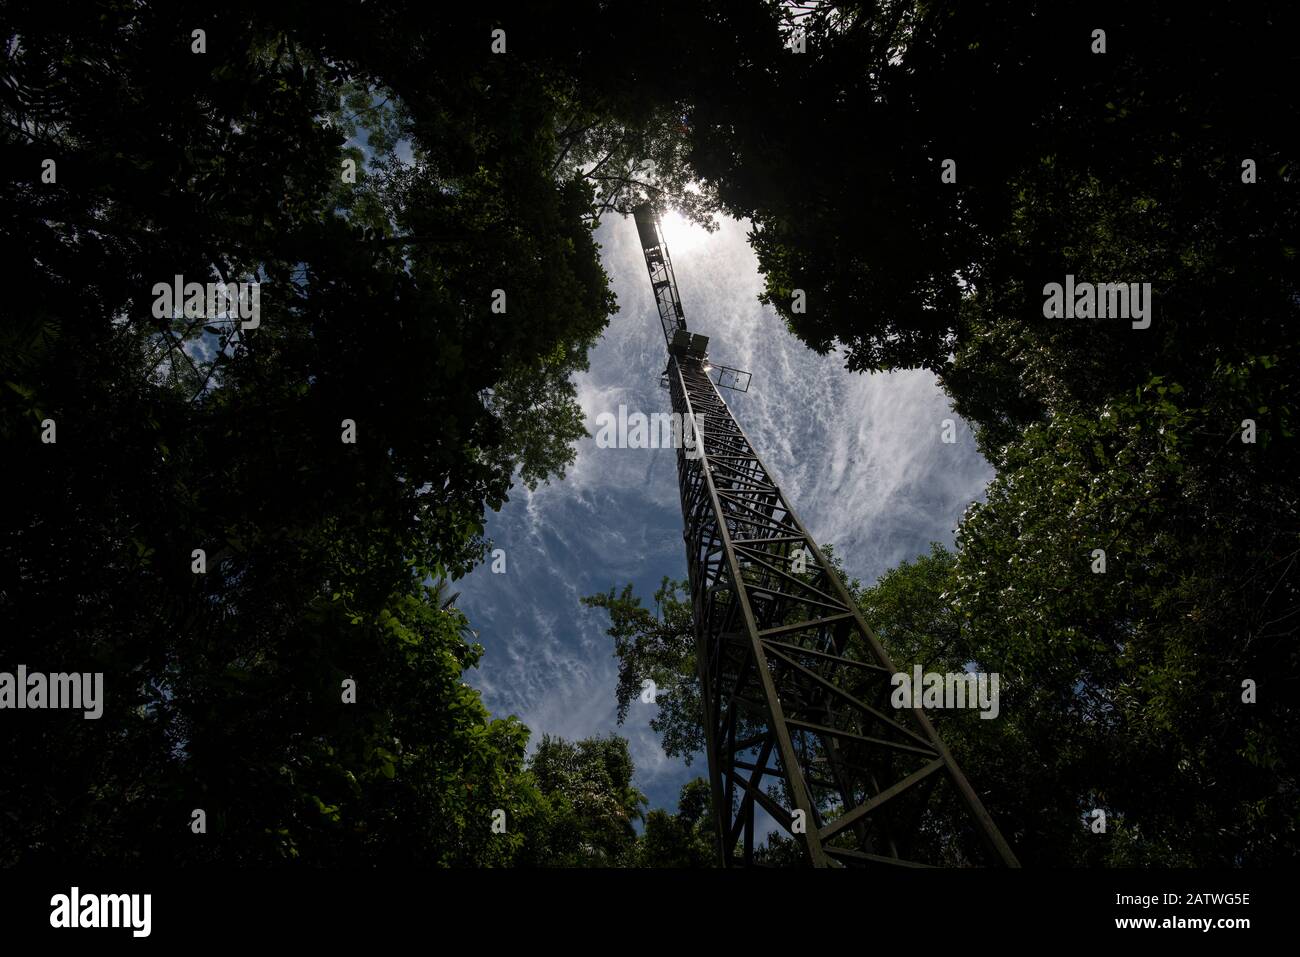 Low angle view of crane used for studying tree canopy at Daintree rainforest observatory, Queensland, Australia. February 2015 Stock Photo